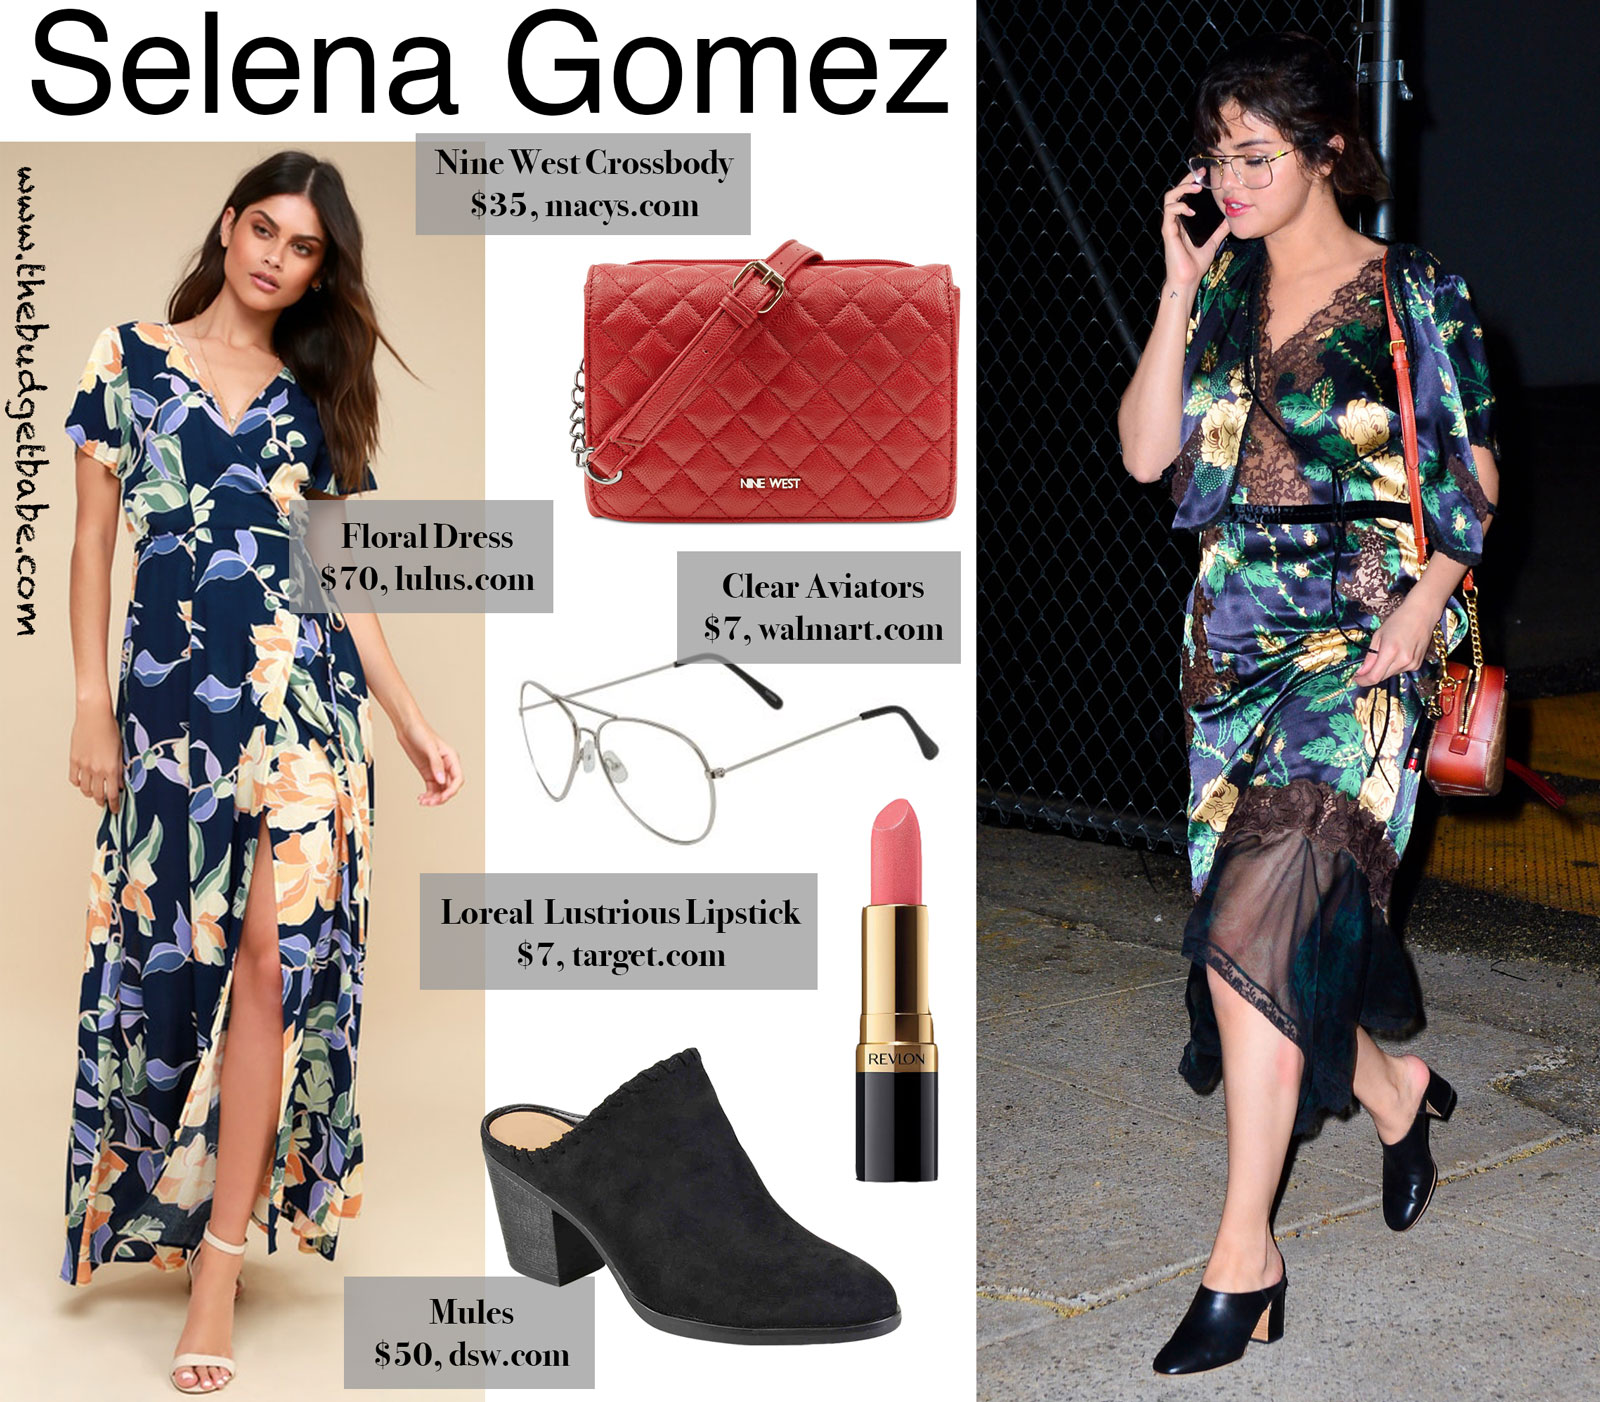 Selena Gomez Floral Dress and Mules